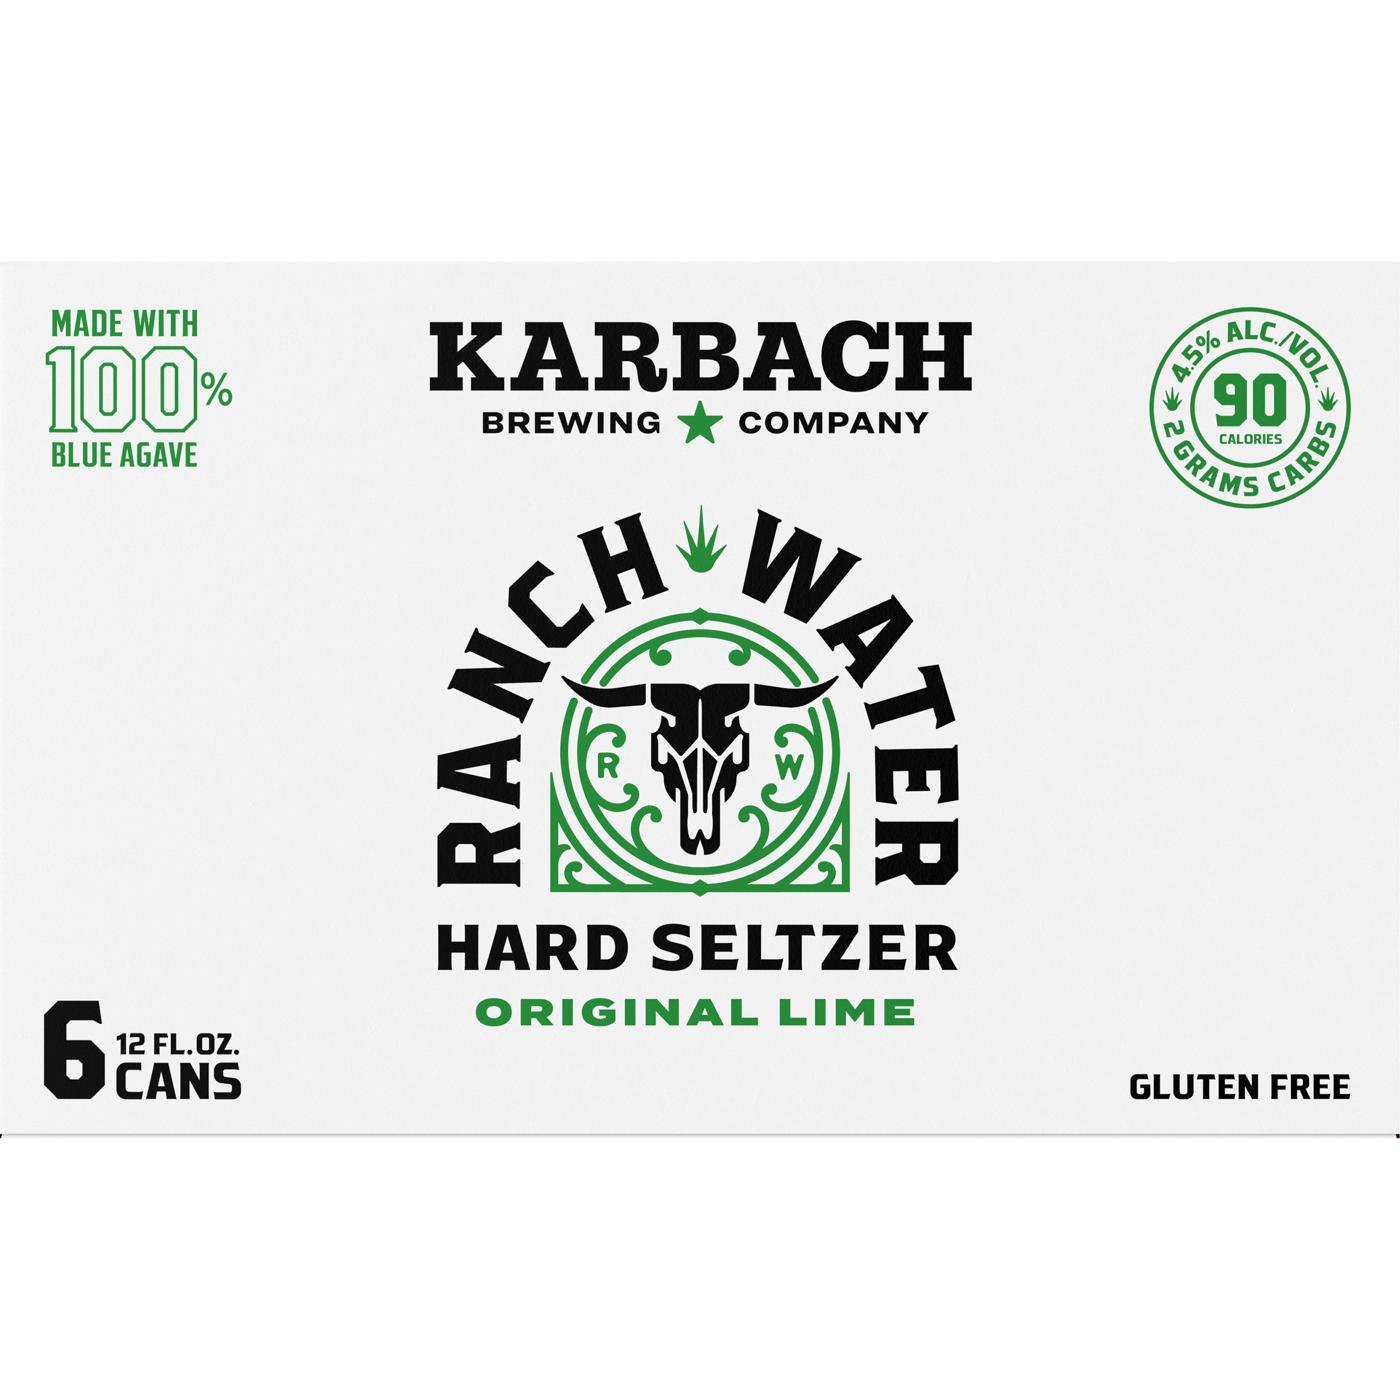 Karbach Original Lime Ranch Water Hard Seltzer 6 pk Cans; image 2 of 2